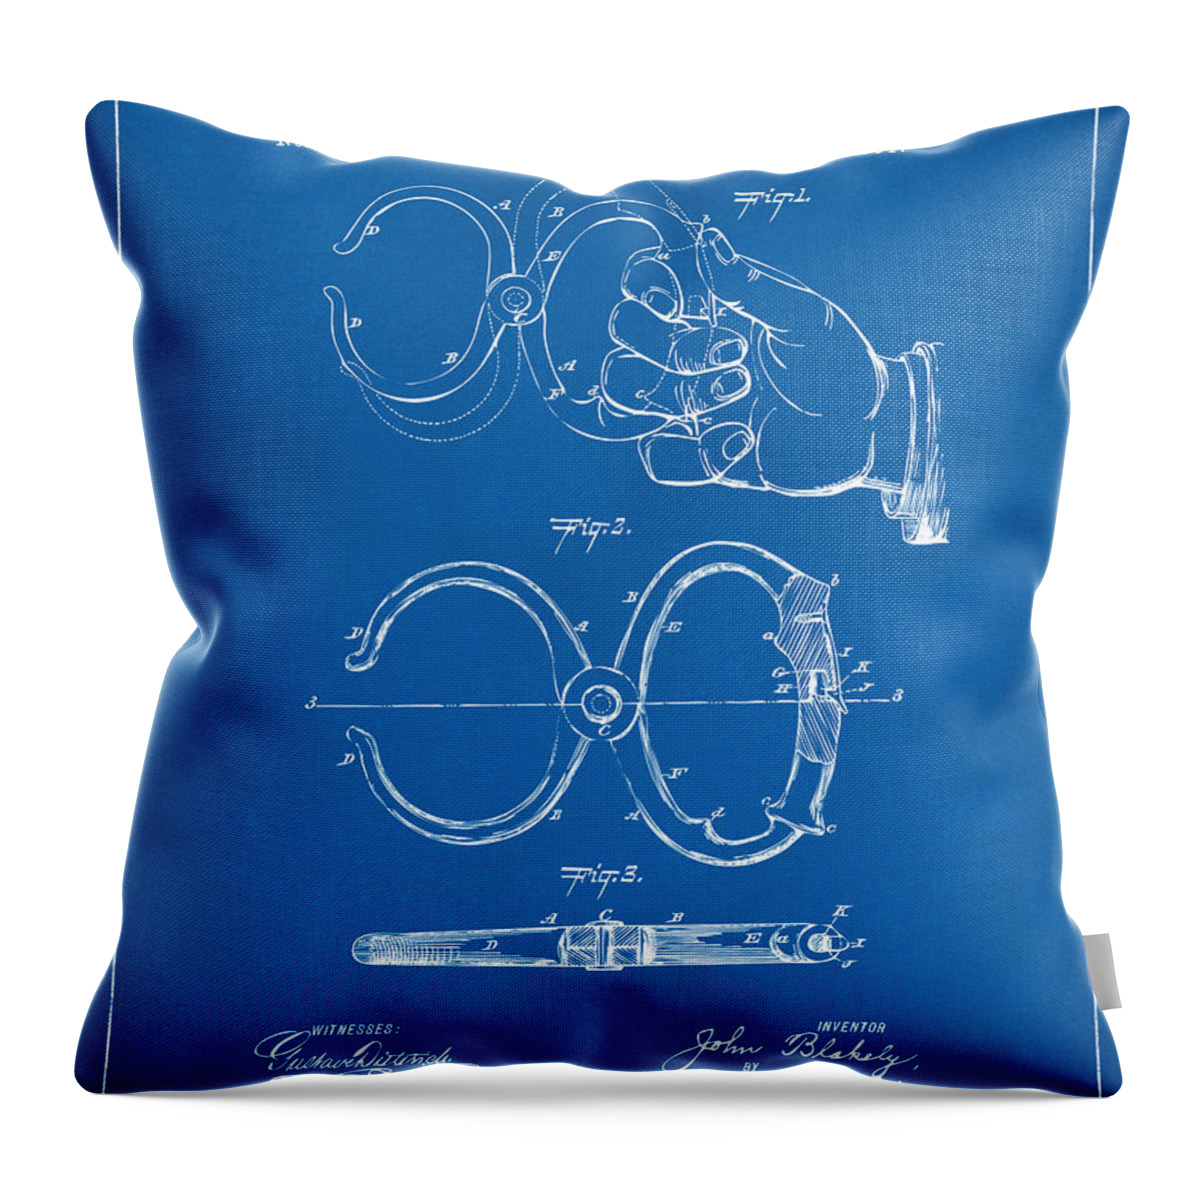 Police Throw Pillow featuring the digital art 1891 Police Nippers Handcuffs Patent Artwork - Blueprint by Nikki Marie Smith